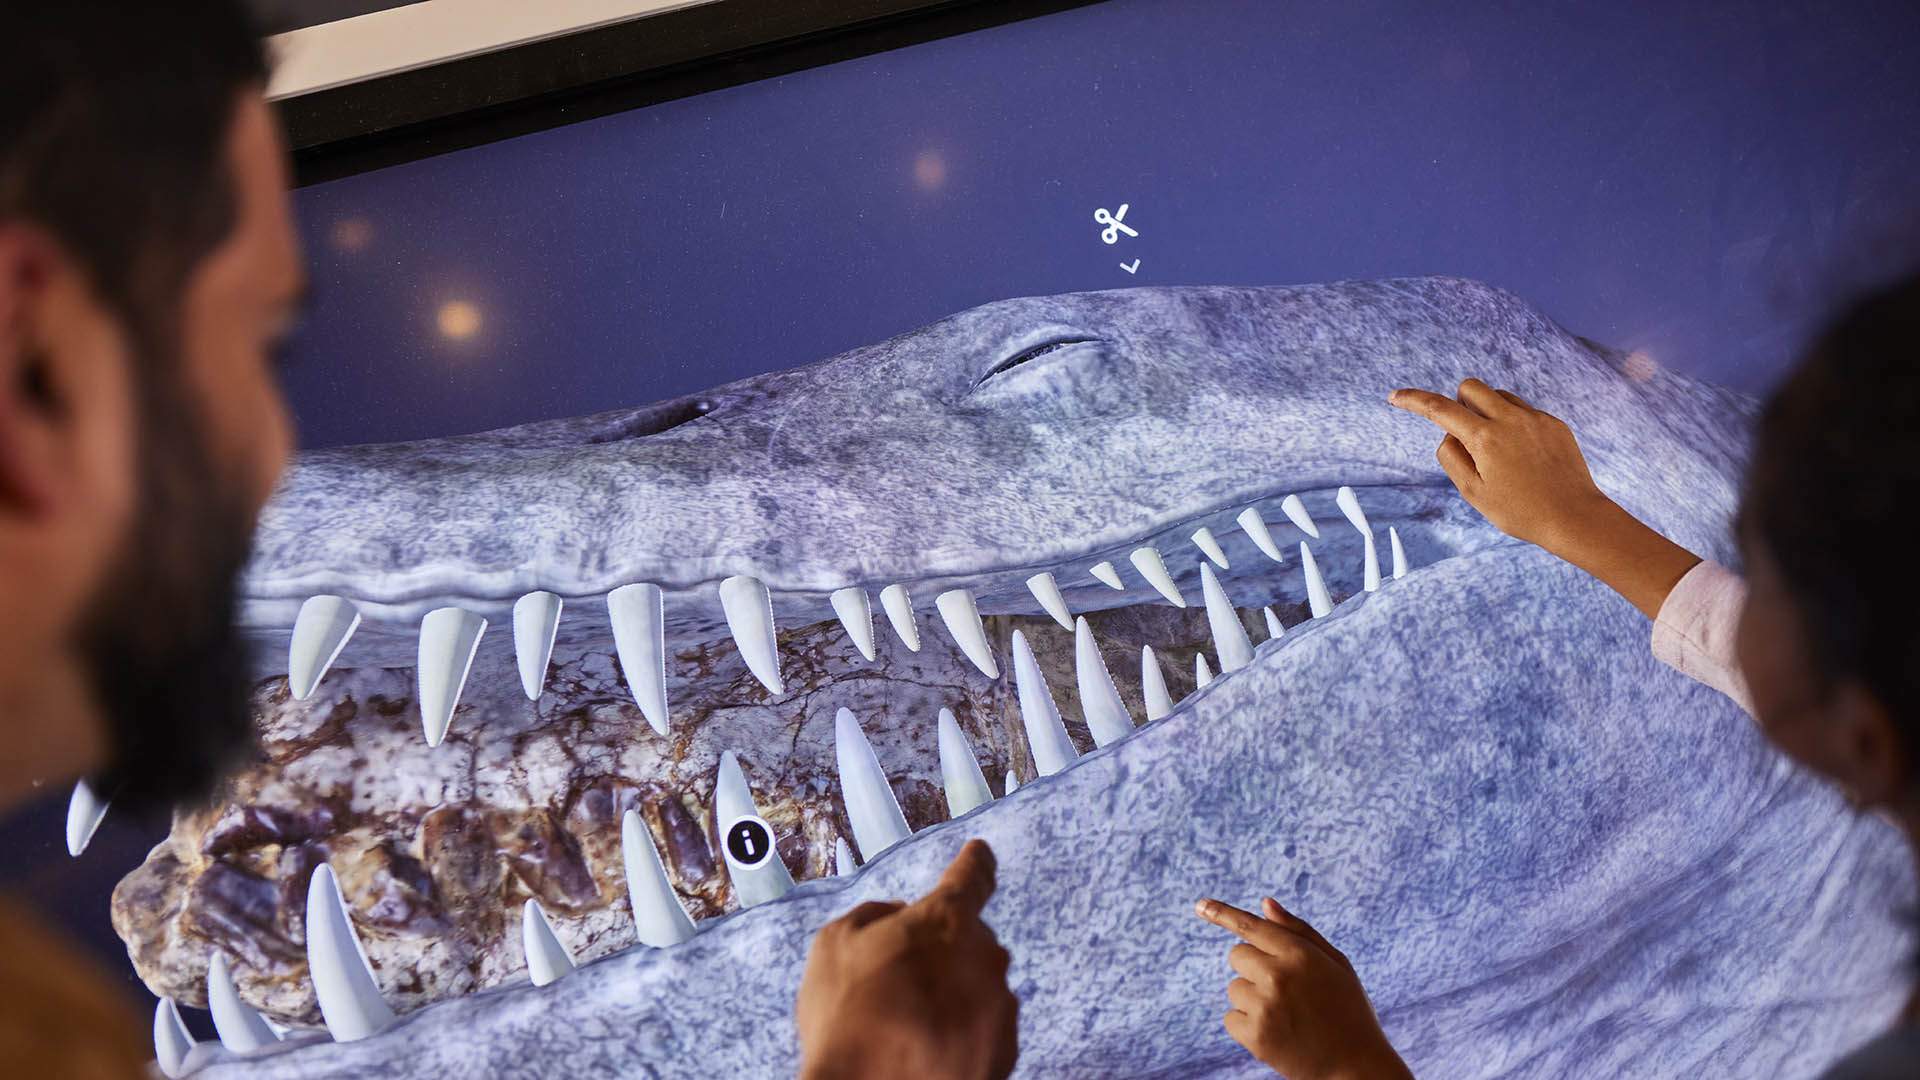 Queensland Museum Has Opened a New Permanent Dinosaur Gallery Filled with Fossils and Meteorites